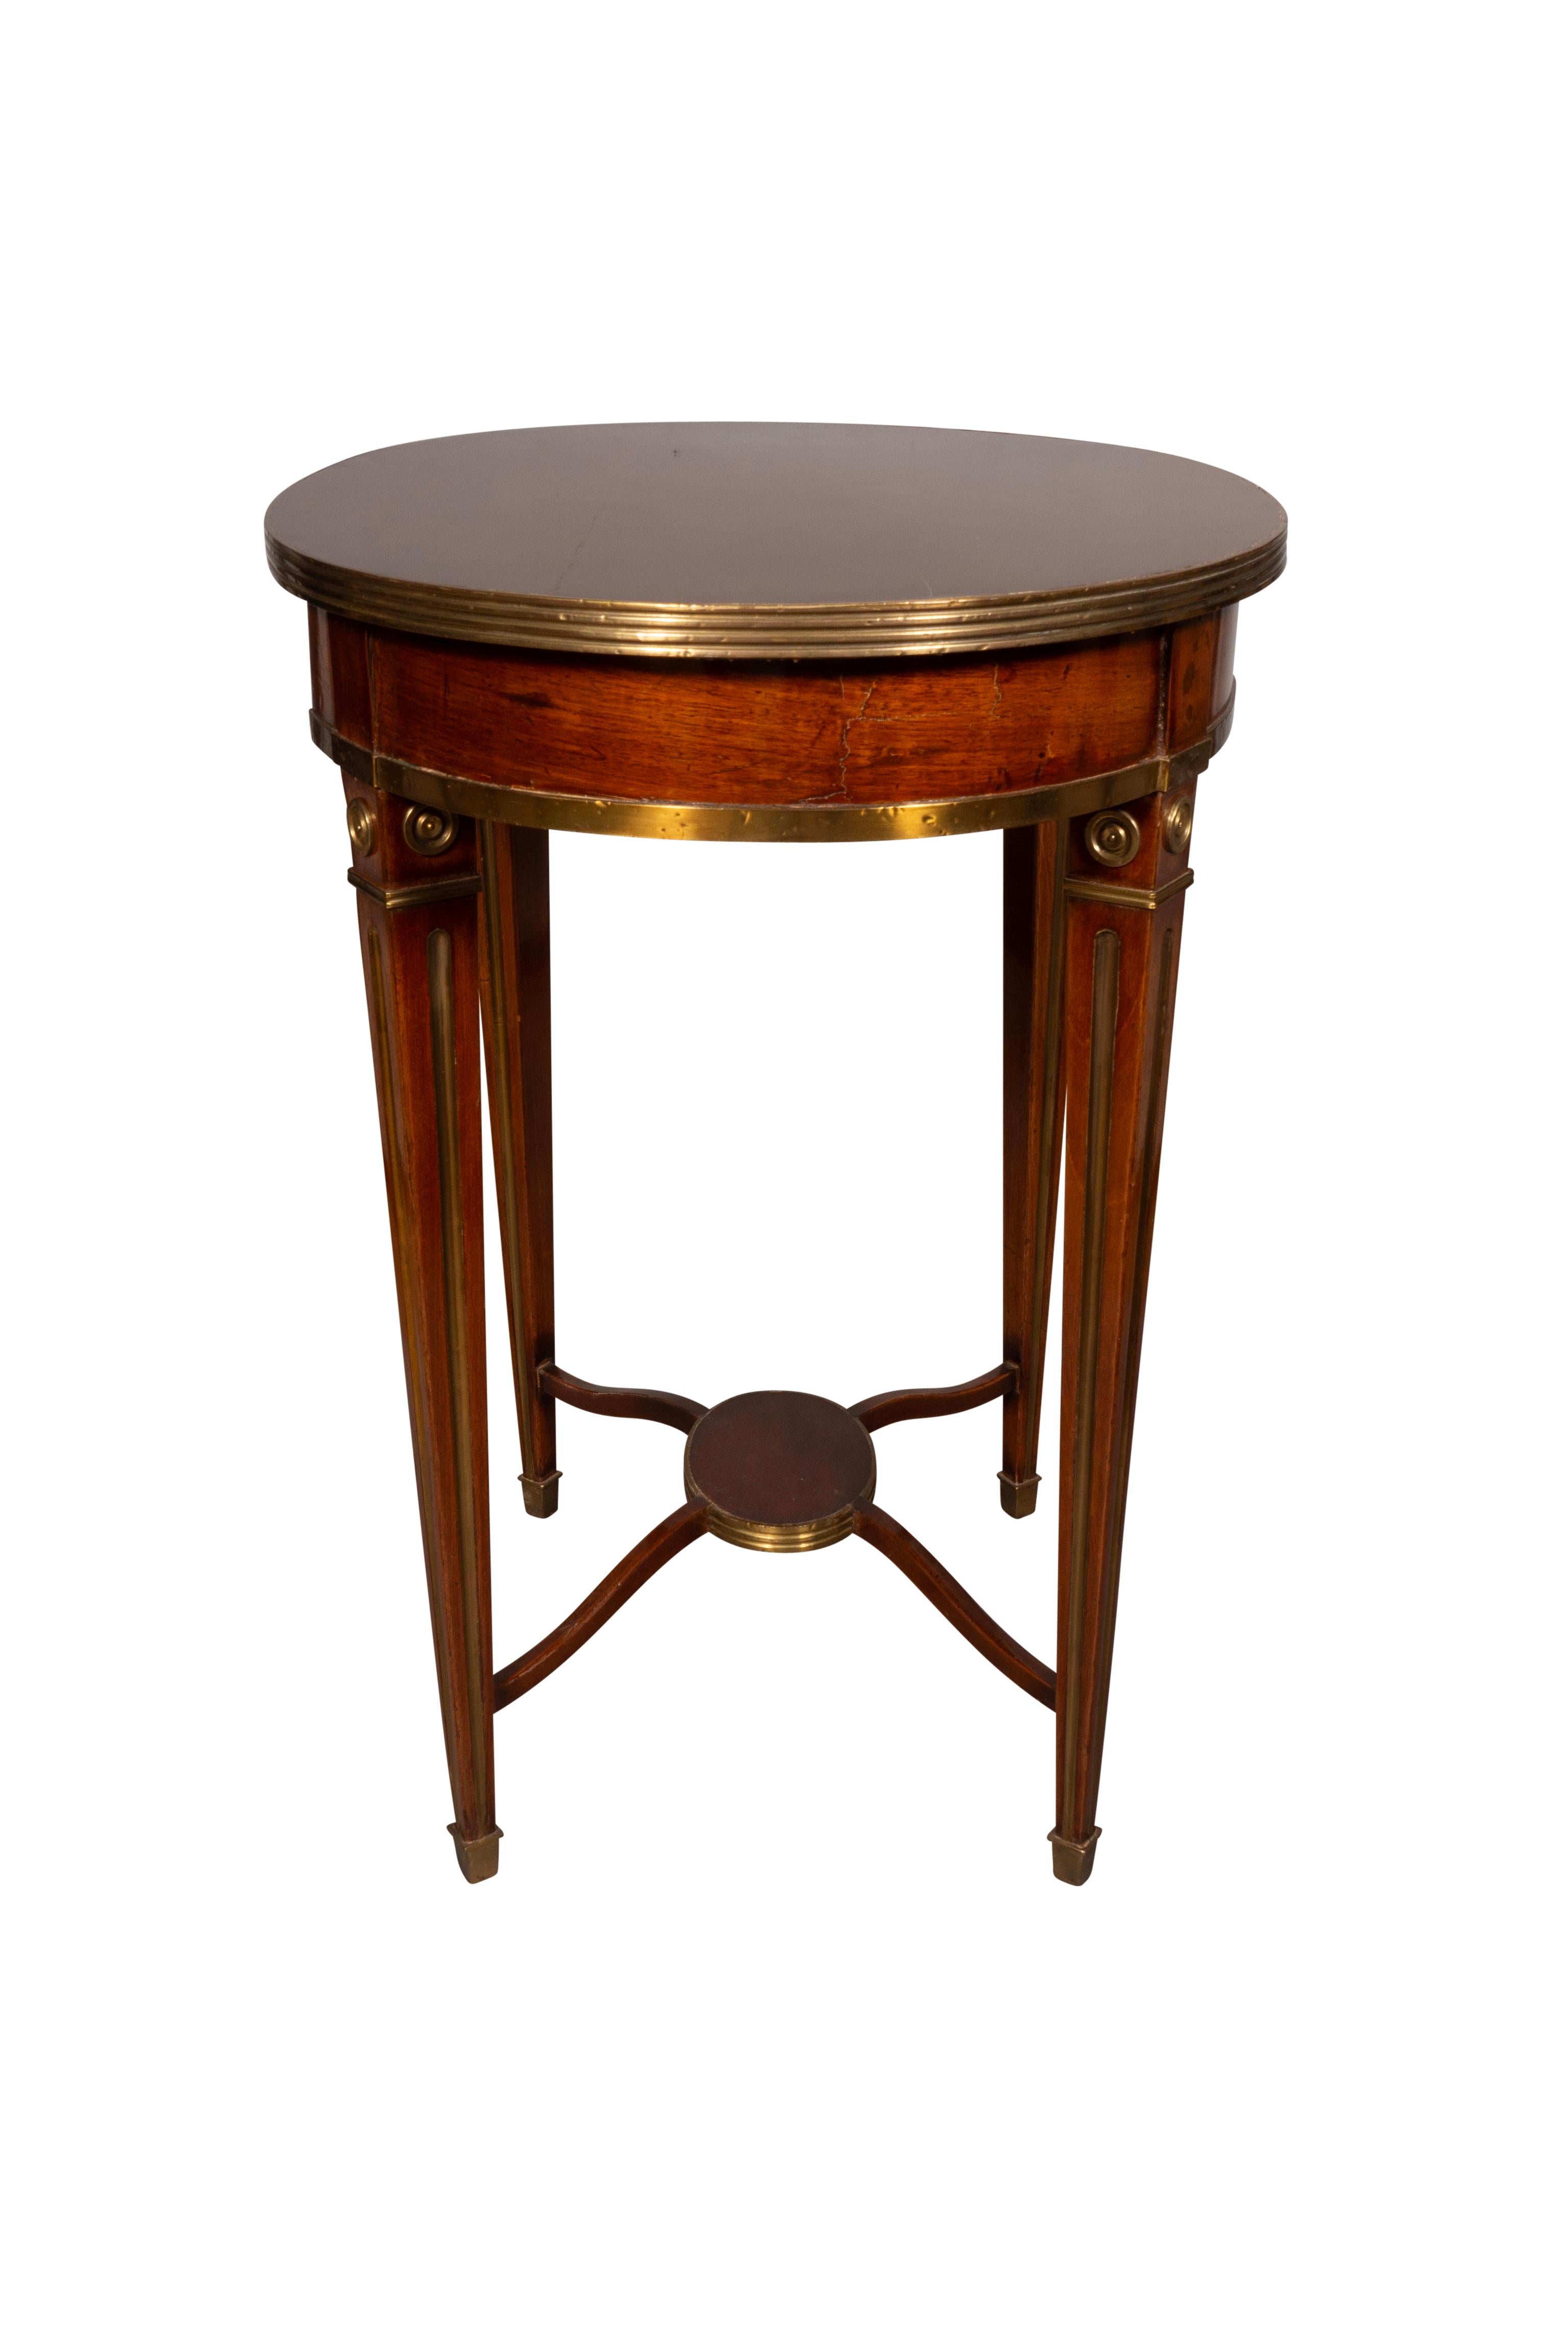 Early 19th Century Russian Mahogany And Brass Mounted Occasional Table For Sale